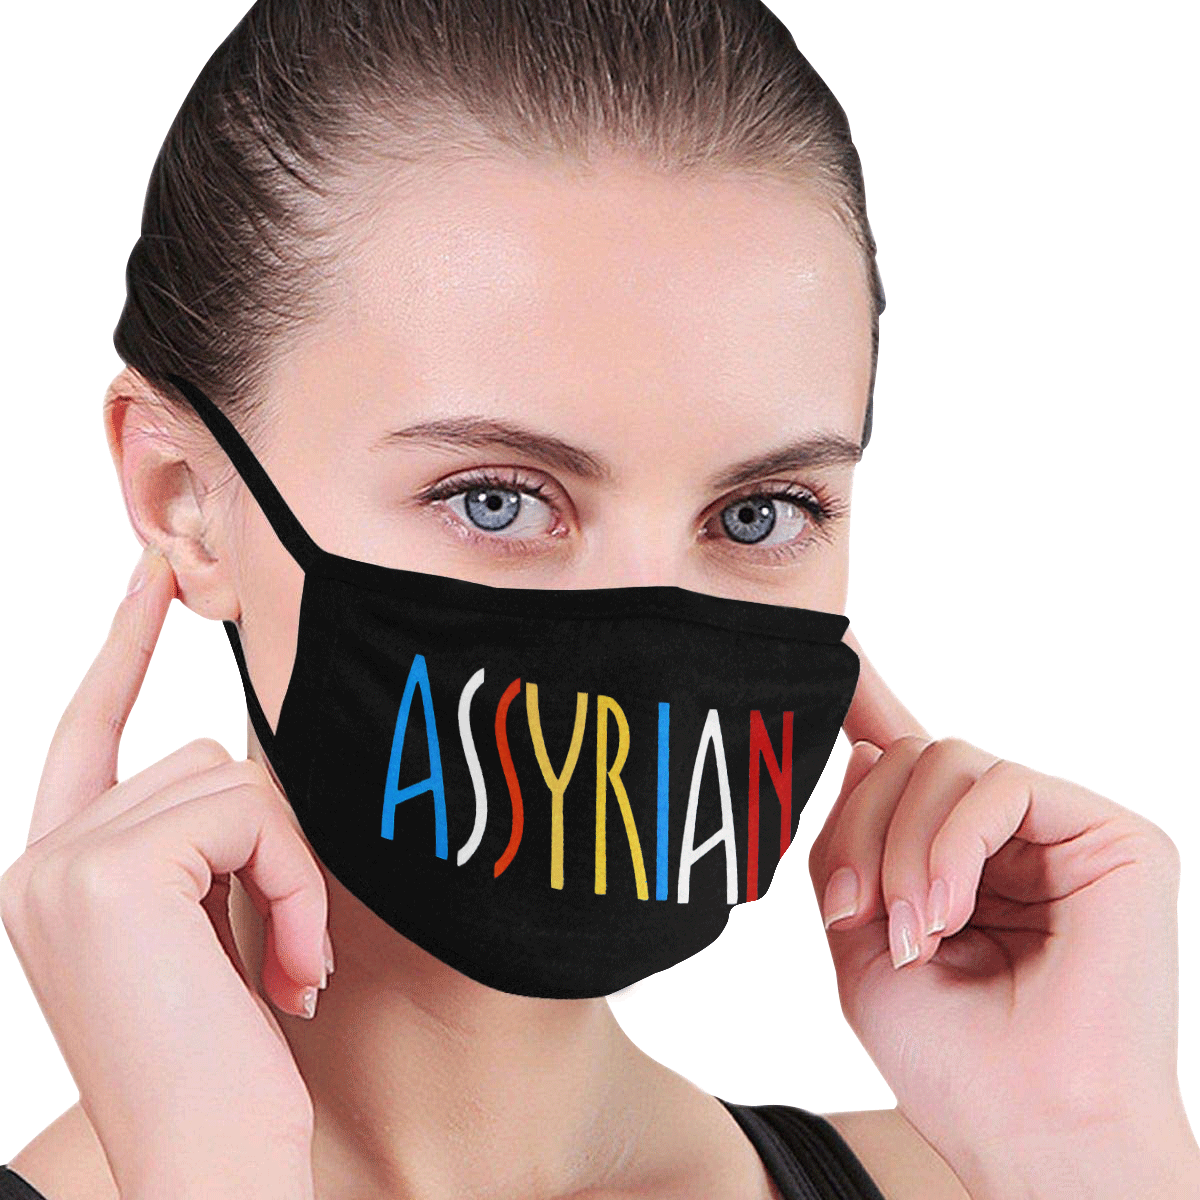 Assyrian Mouth Mask